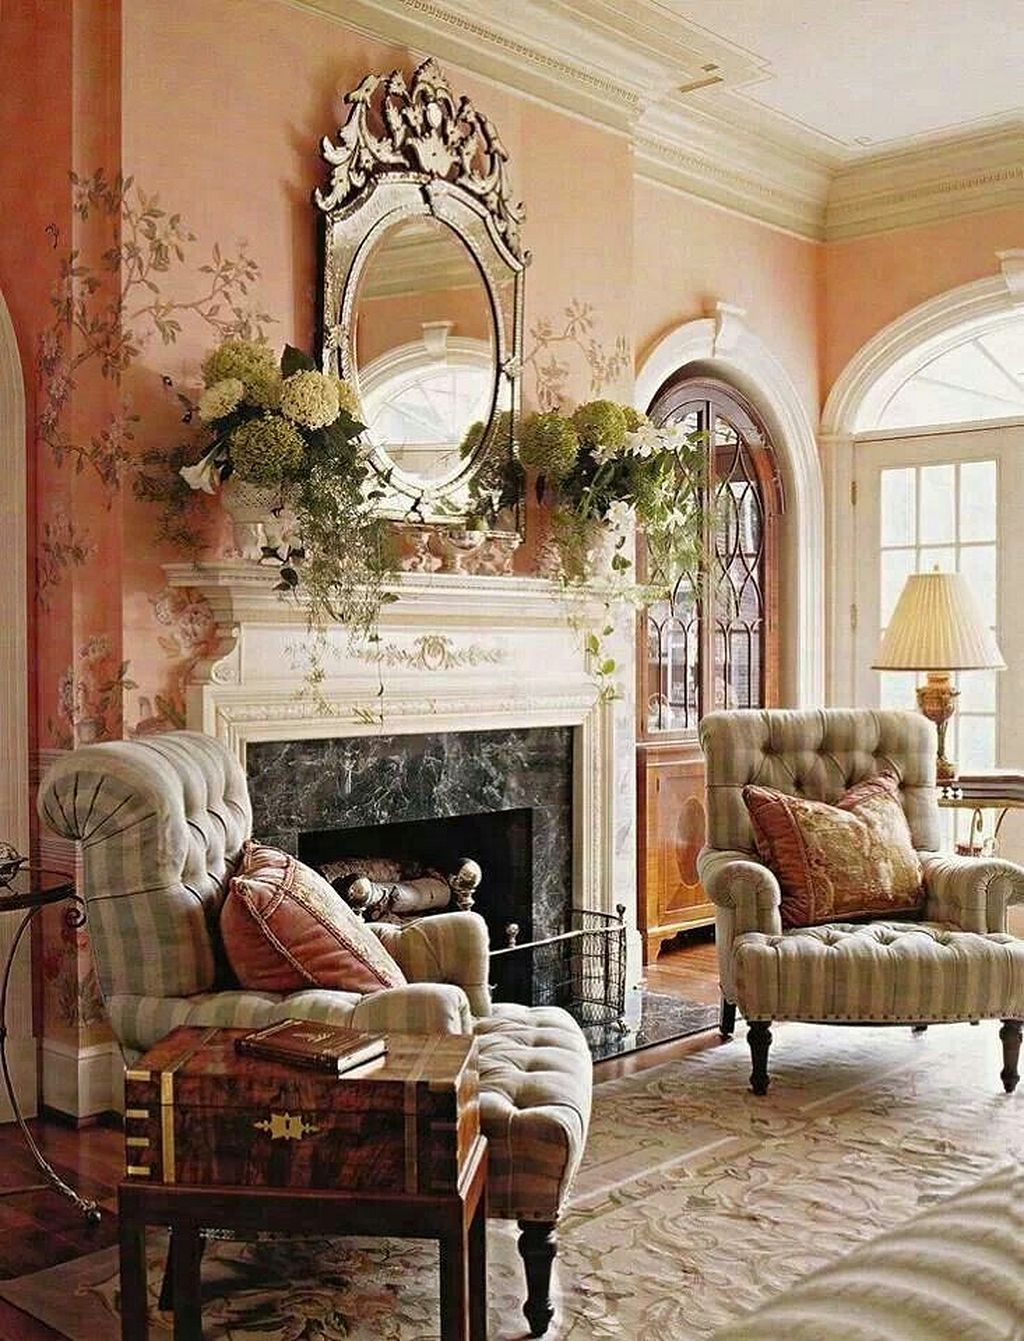 18 Images of English Country Home Decor Ideas Decor